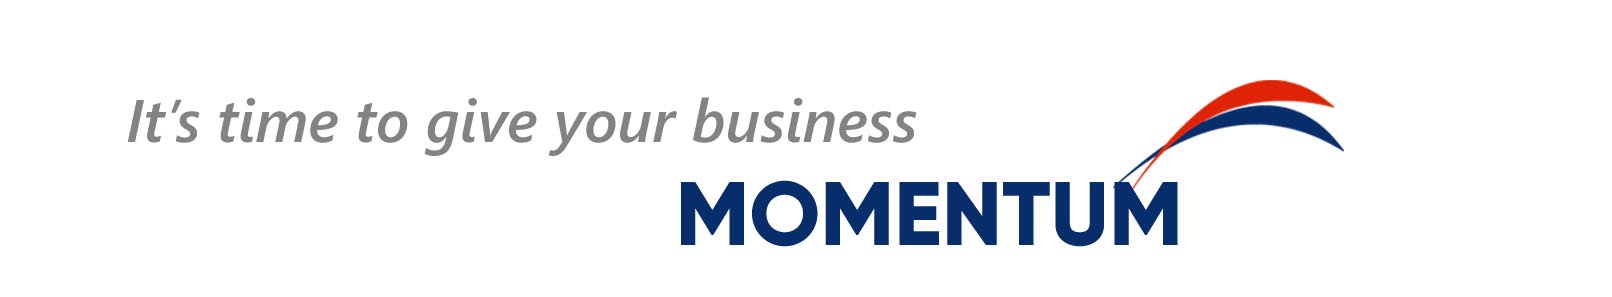 Give your business Momentum